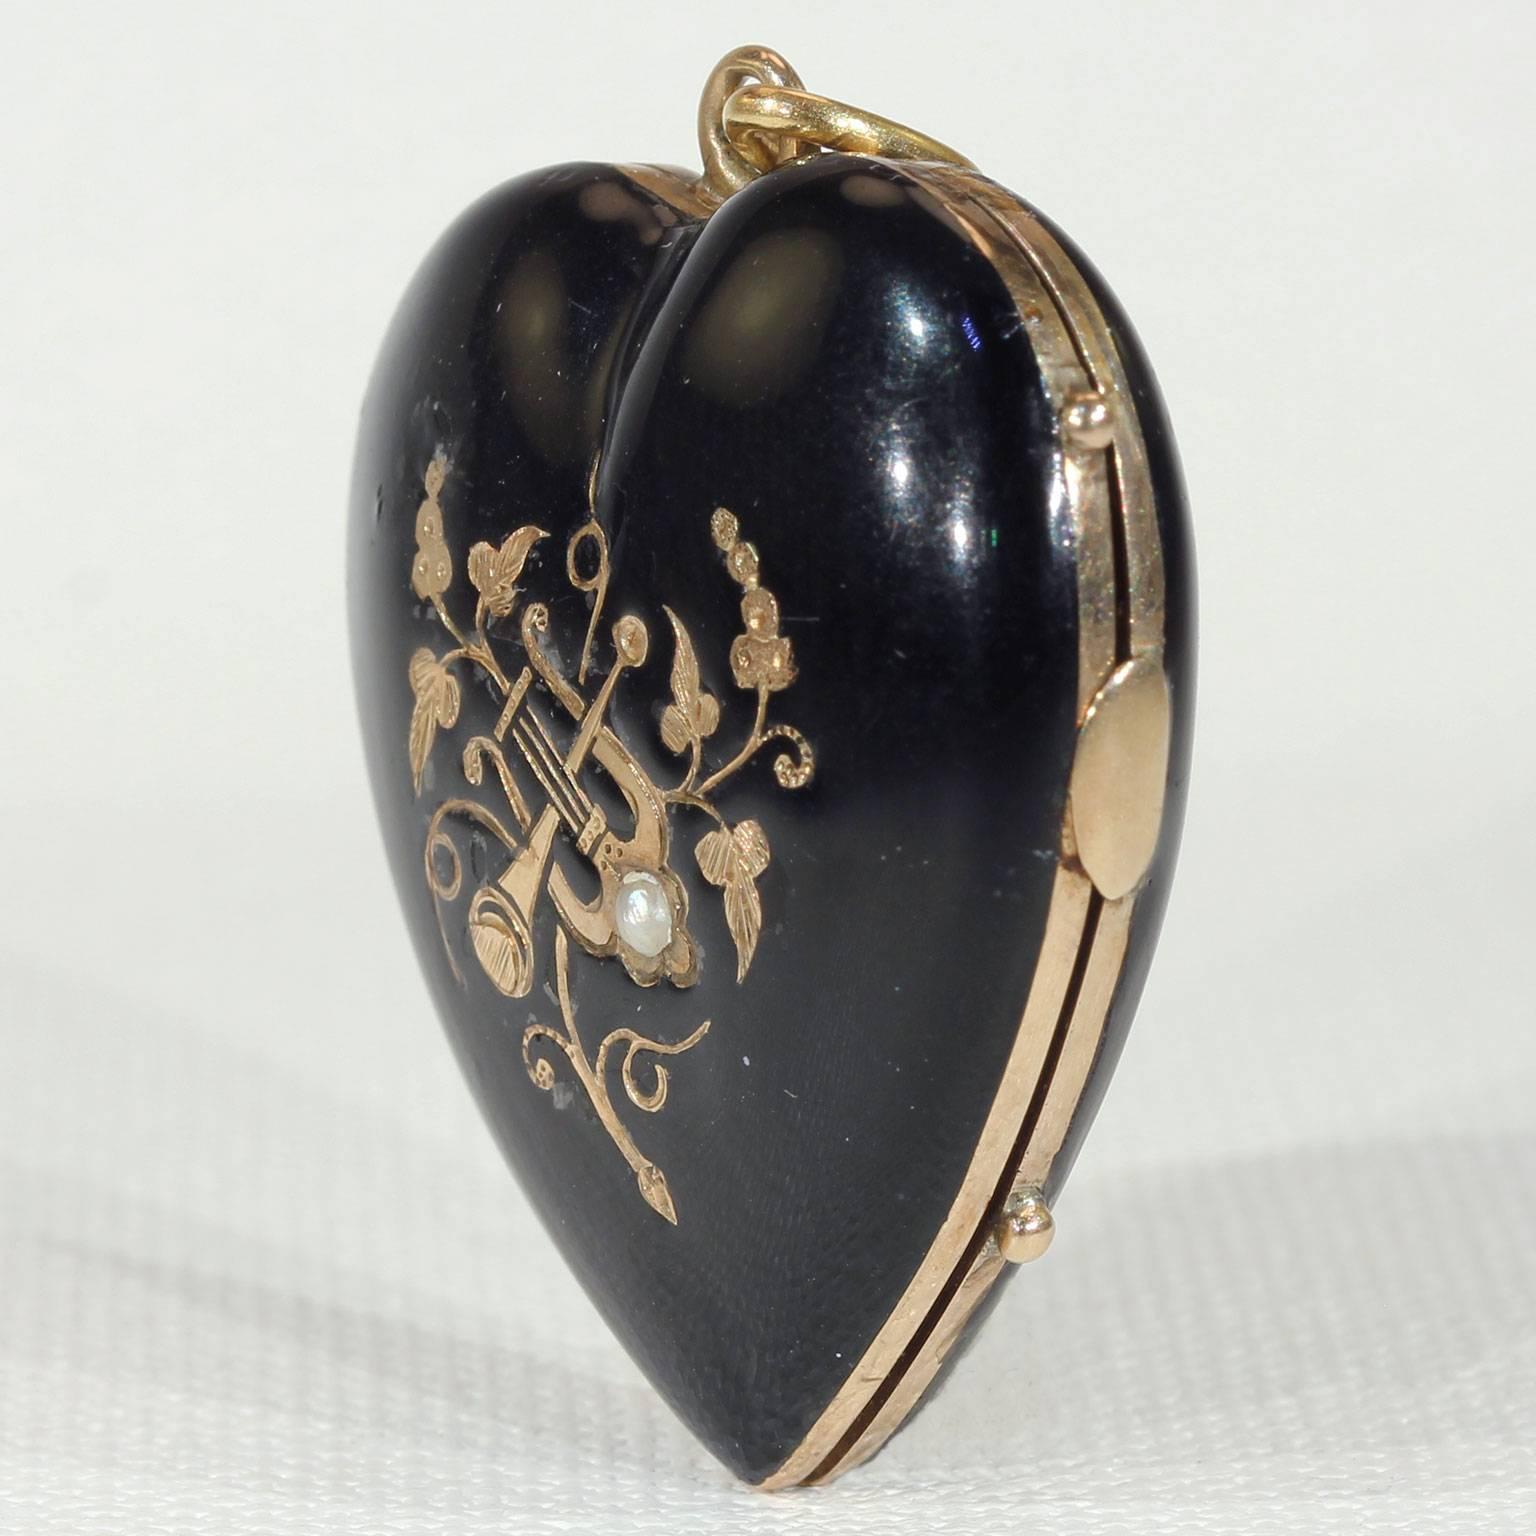 This antique Victorian black enameled and gold heart mourning locket was handcrafted around 1870 in England. The front features a golden trumpet and lyre, surrounded by an array of golden flowers. A 2 mm diameter pearl decorates the stringed